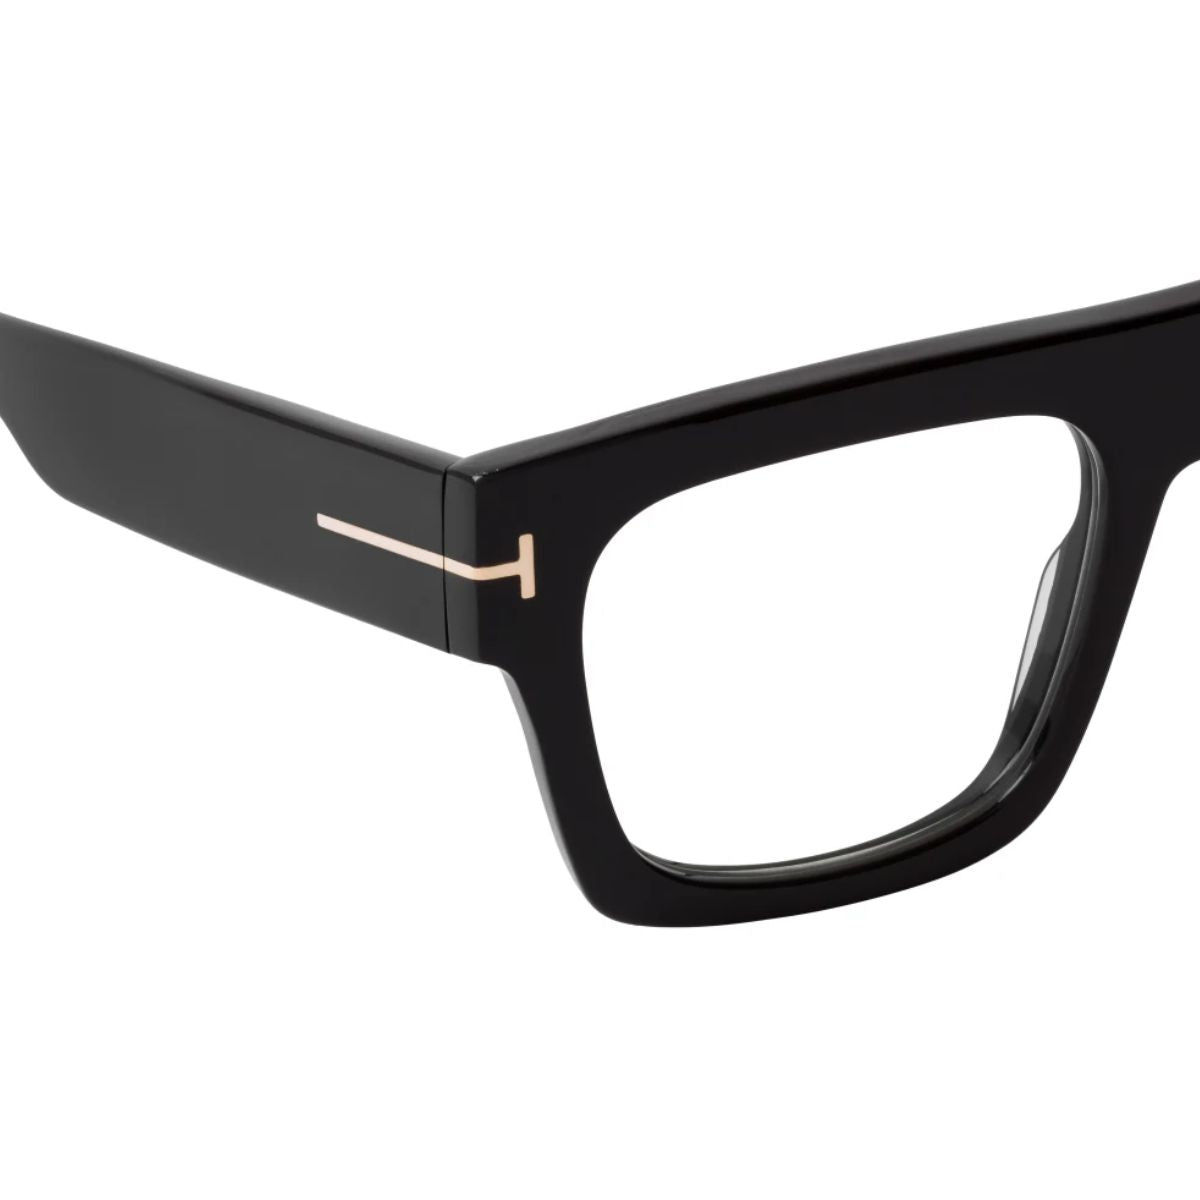 "Tom Ford 5634 Optical Frames For Both Mens & Womens At Optorium"